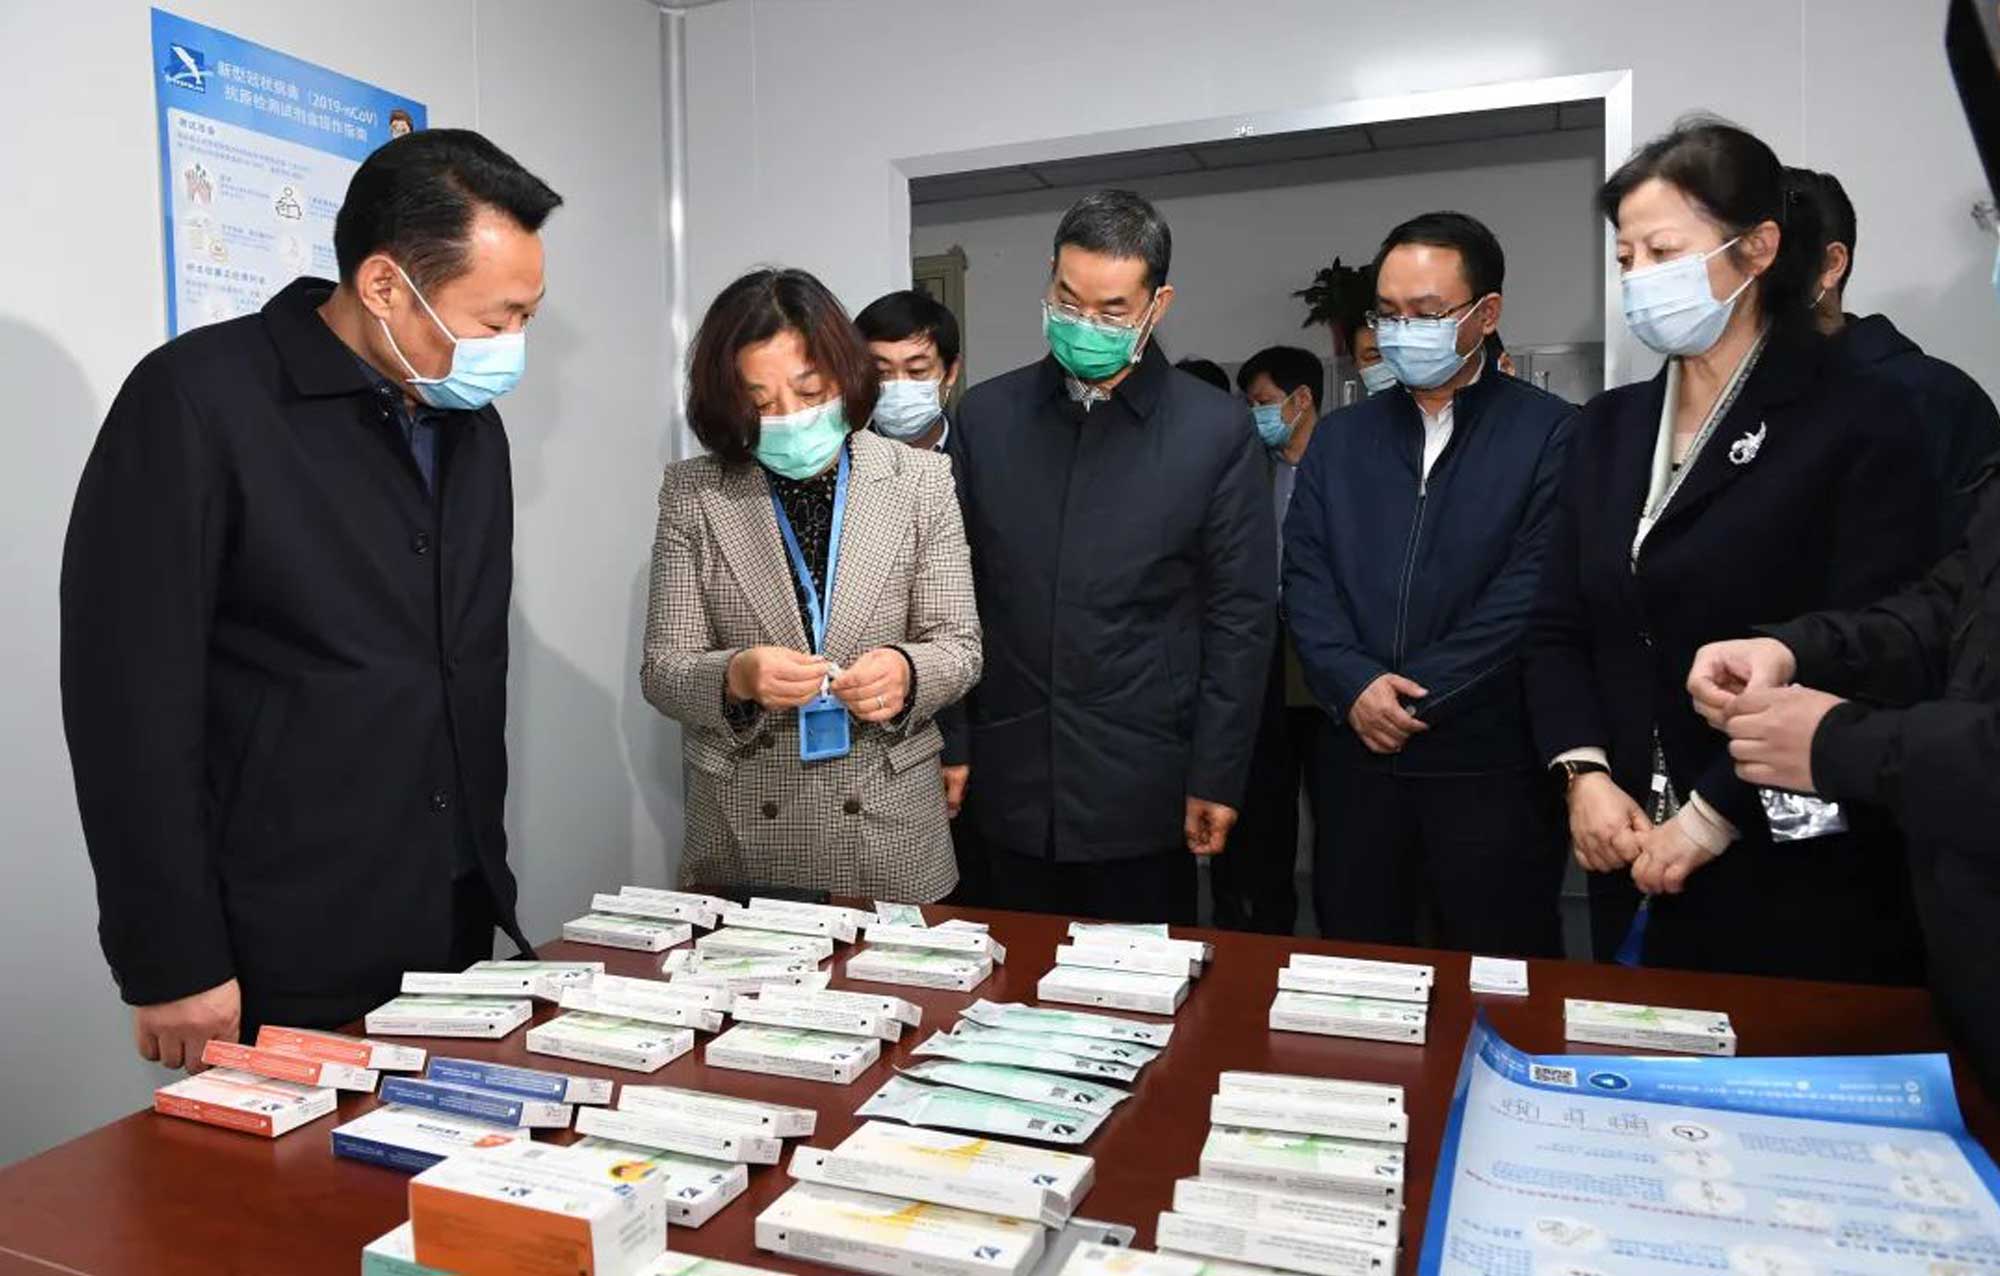 Secretary Yu Aihua visited DEEPBLUE Medical for investigation and research